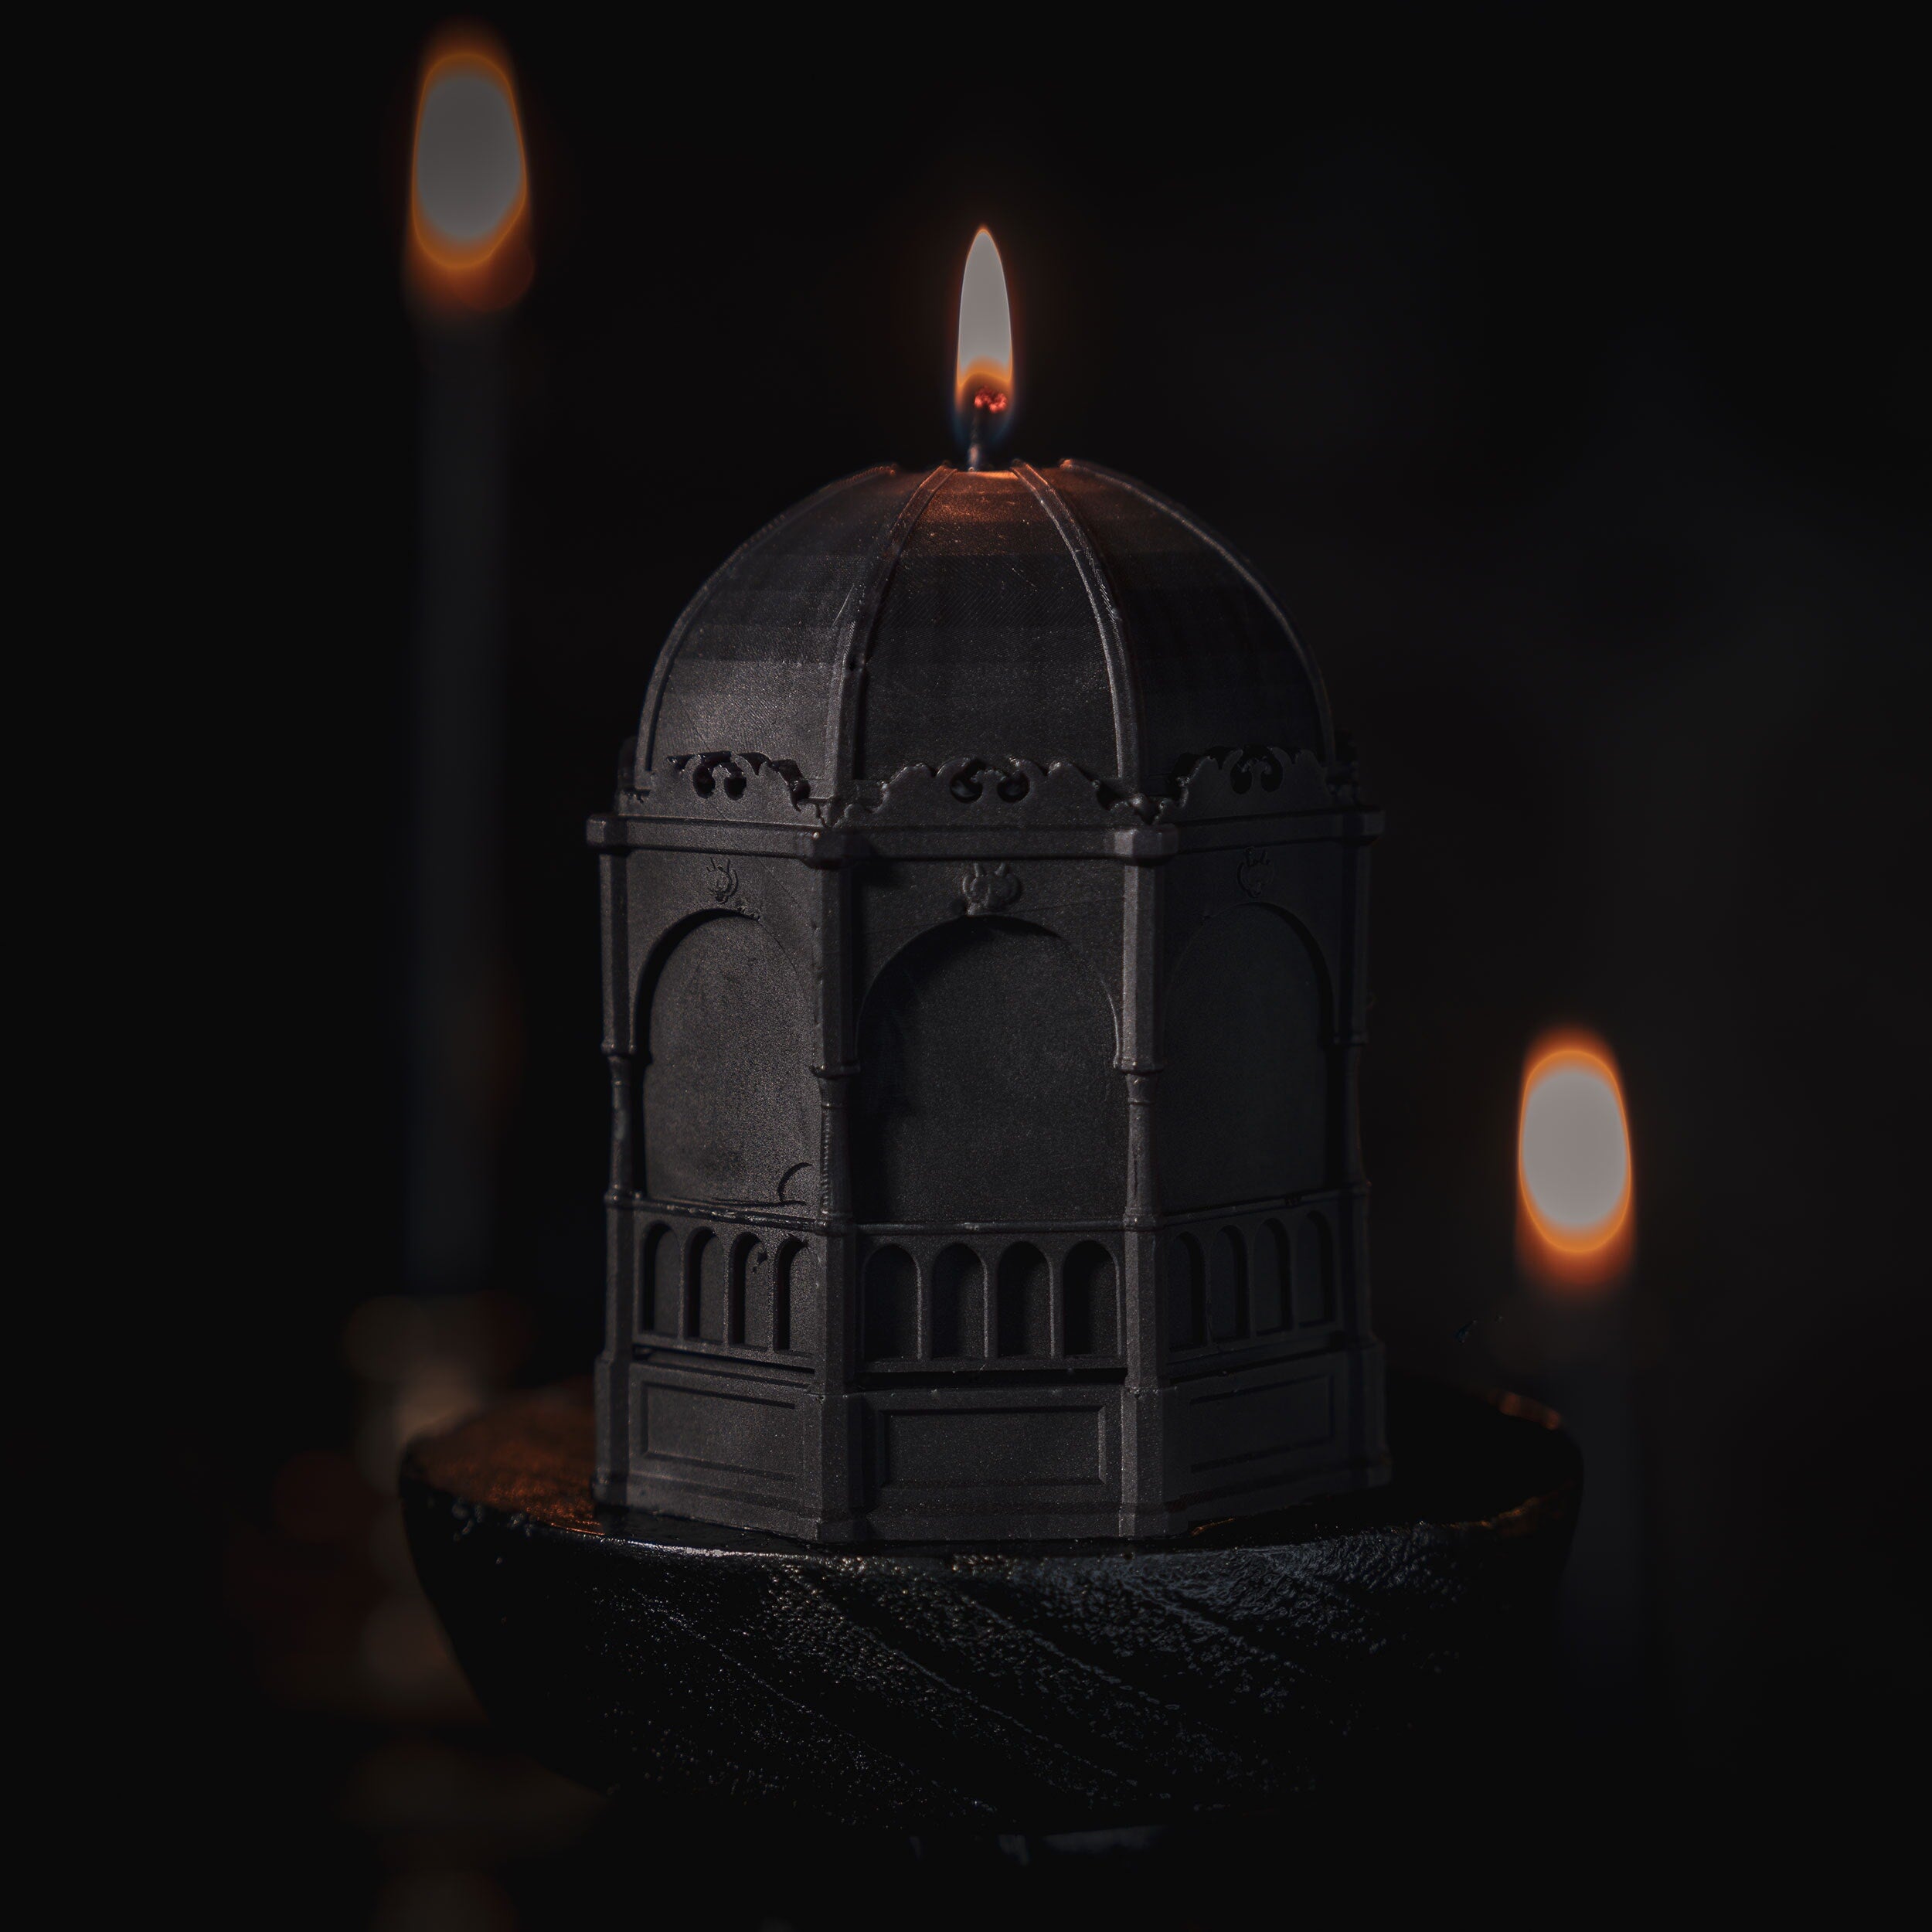 Basilica Gothic pillar candle by The Blackened Teeth Gothic Home Decor